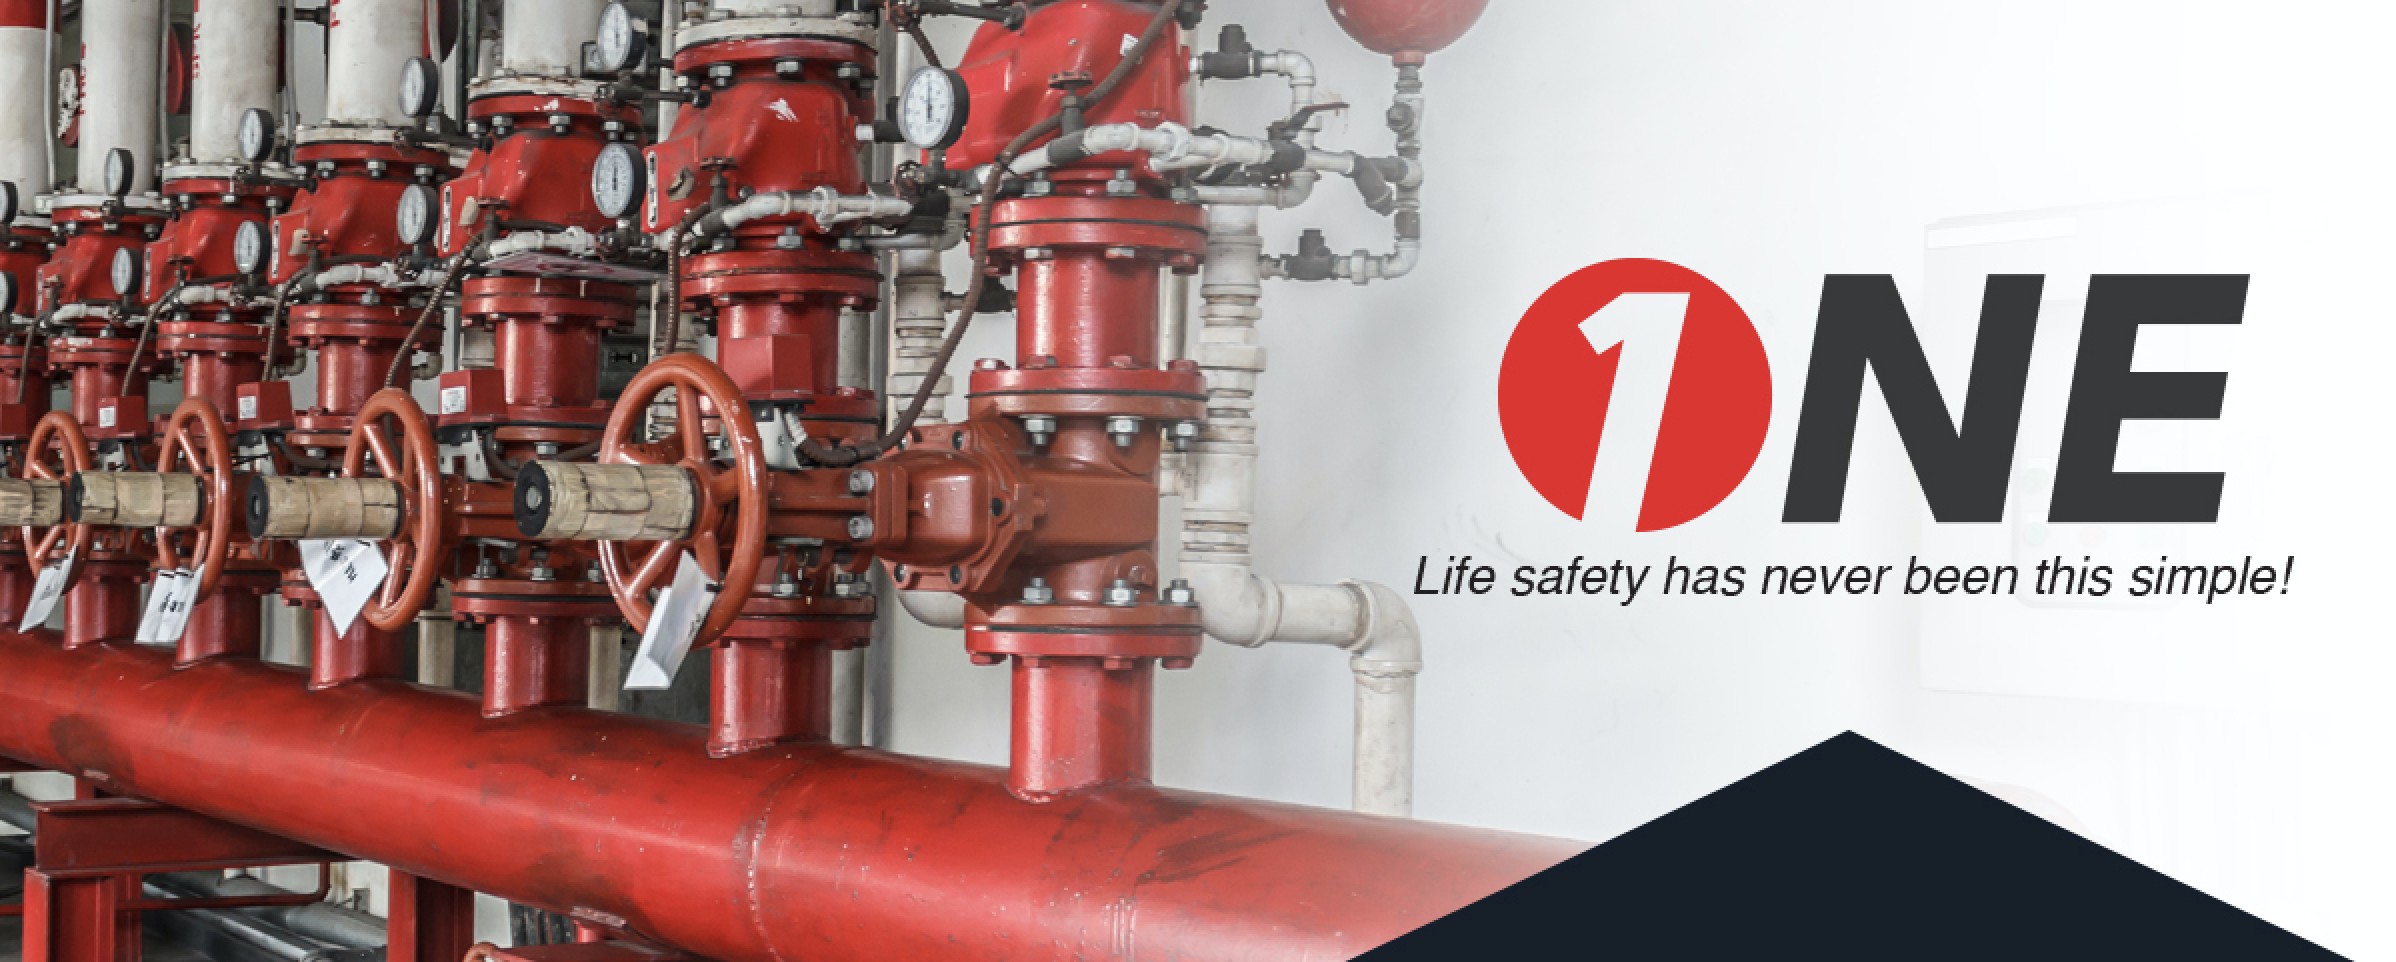 Life Safety Engineered Systems, Inc.